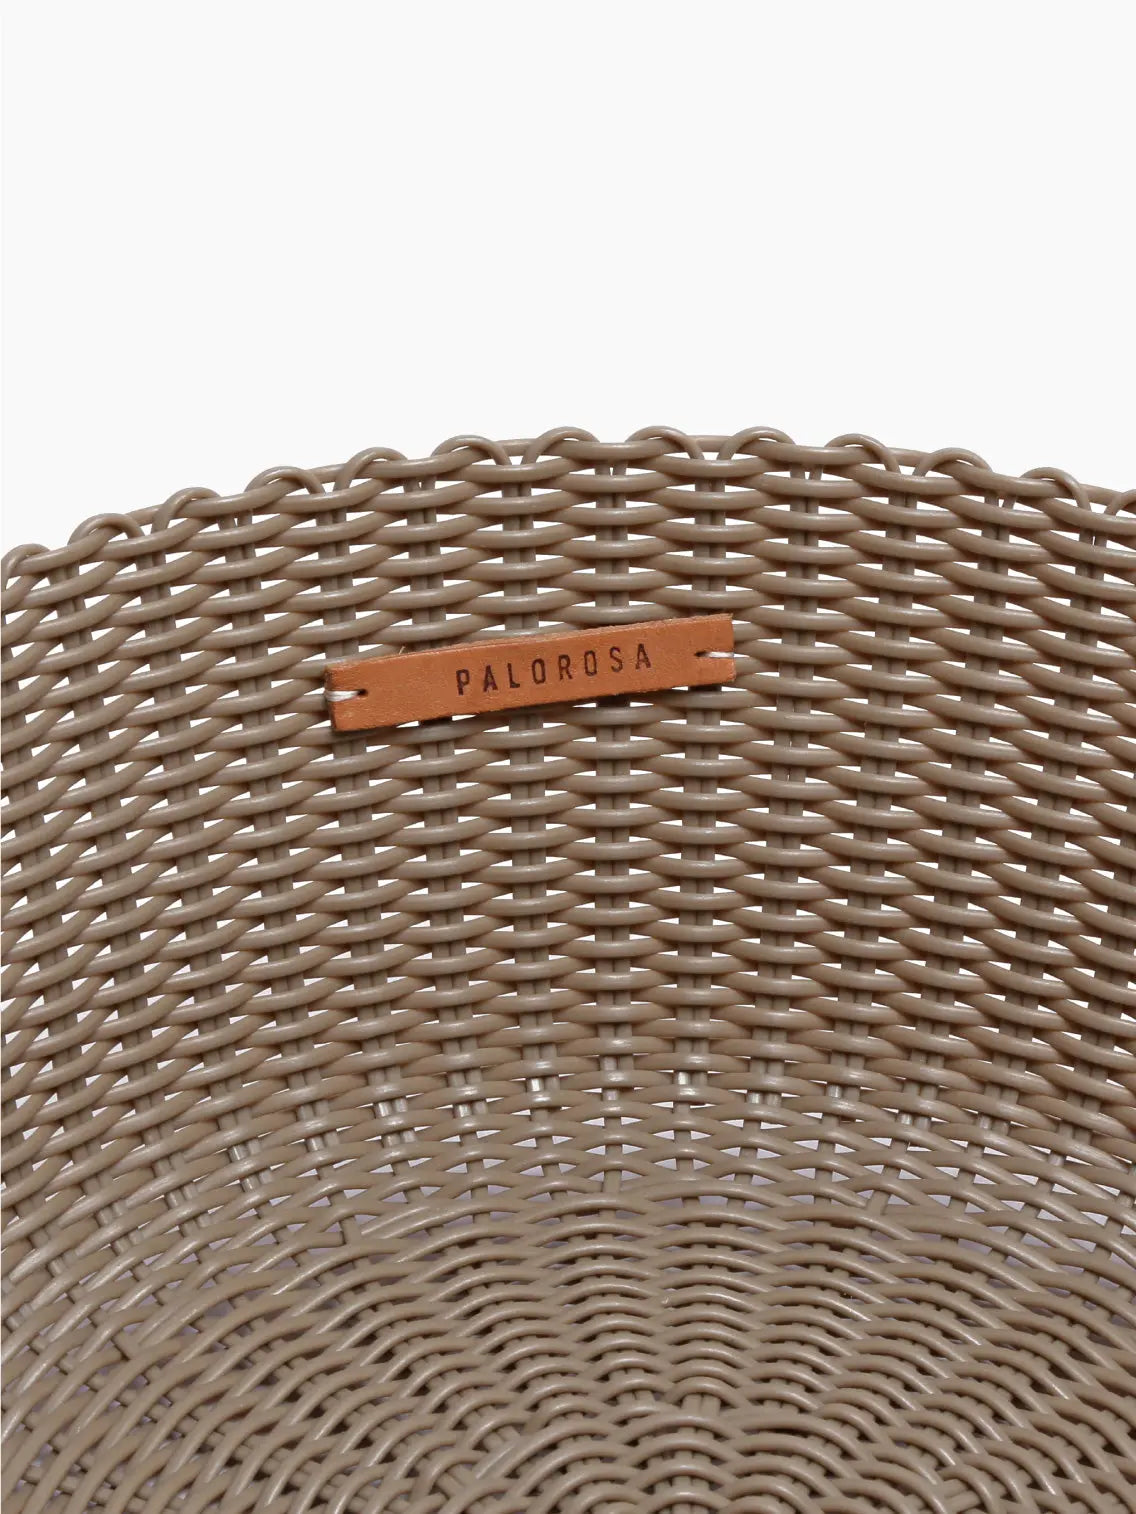 A round, woven basket in a light brown color, available at Bassalstore and placed against a white background. The Palorosa Fruit Basket Sand Small features a classic weave pattern and sturdy edges.